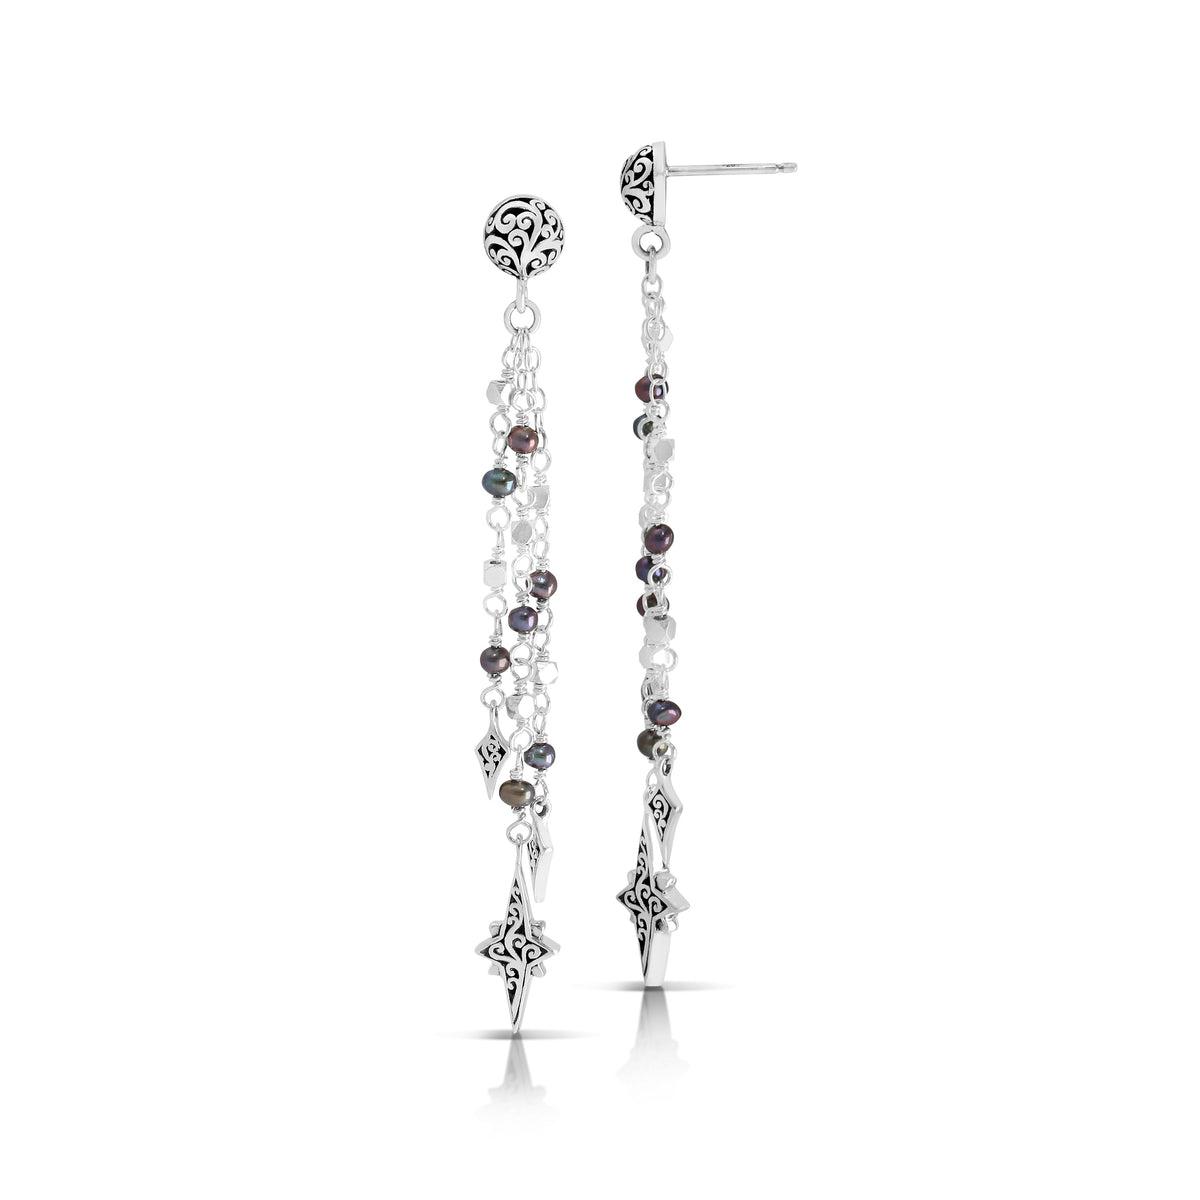 Peacock Pearl Beads Waterfall with Starbright Dangle Earring